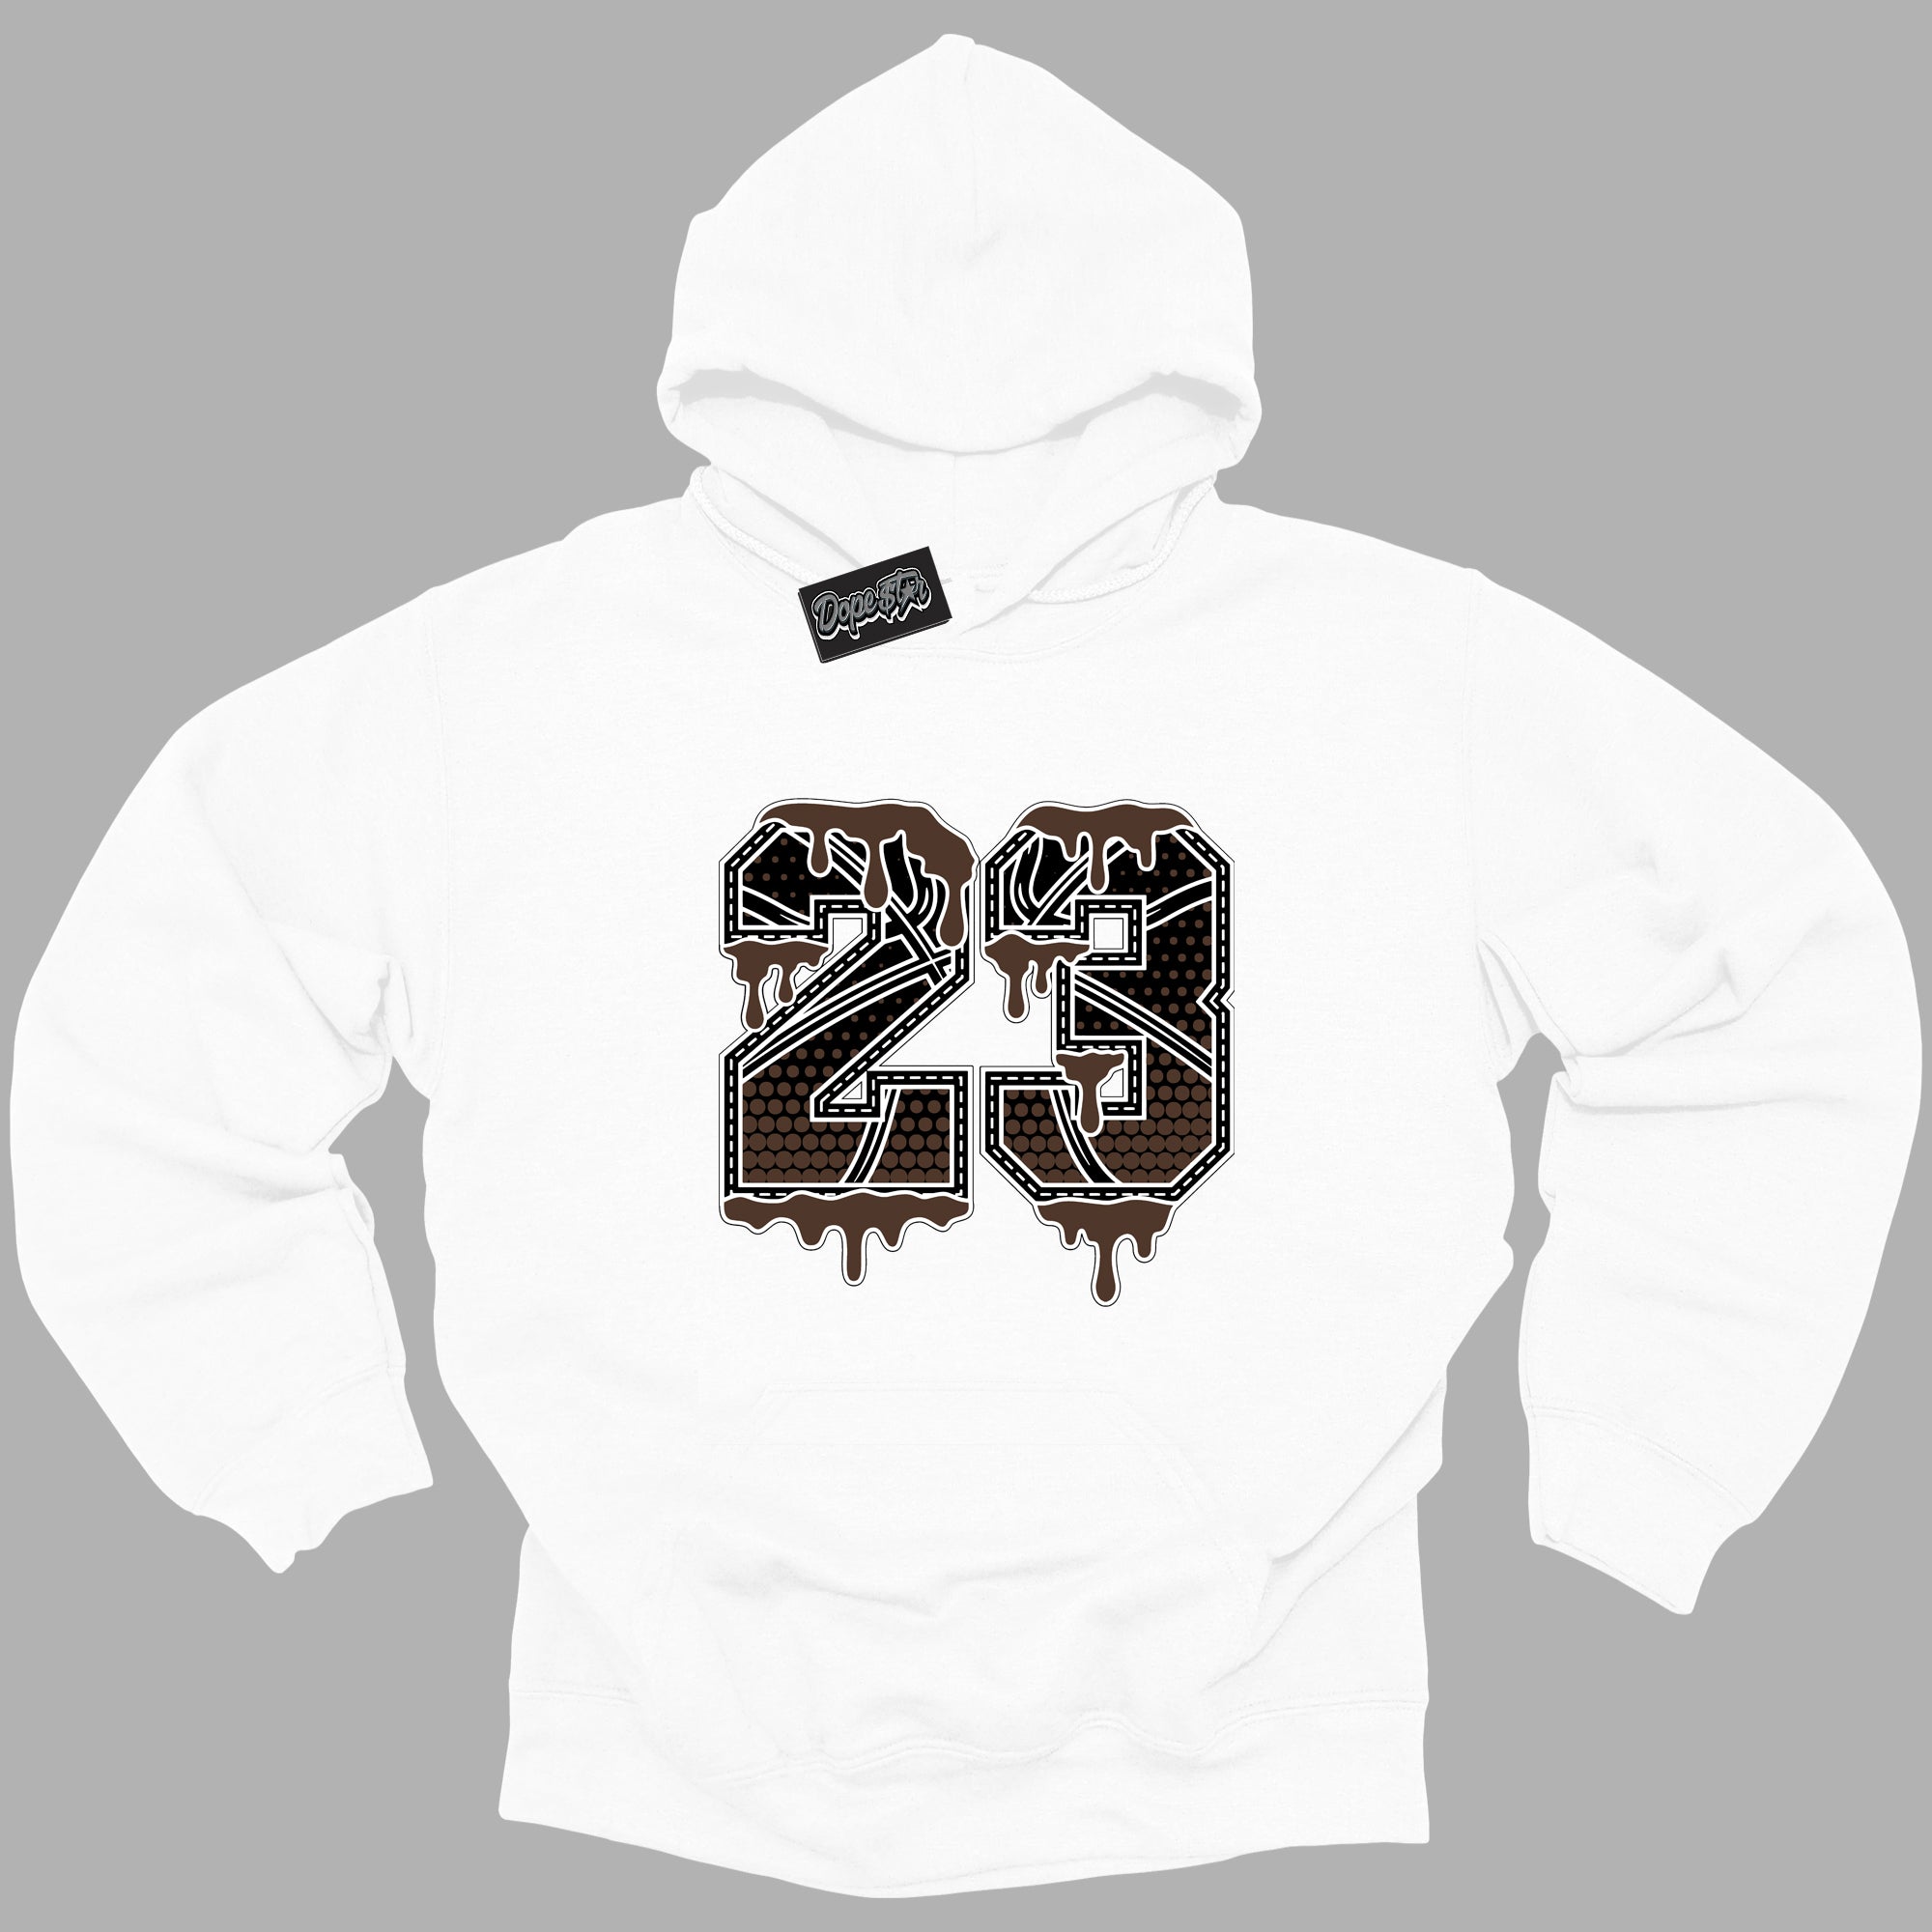 Cool White Graphic DopeStar Hoodie with “ 23 Ball “ print, that perfectly matches Palomino 1s sneakers